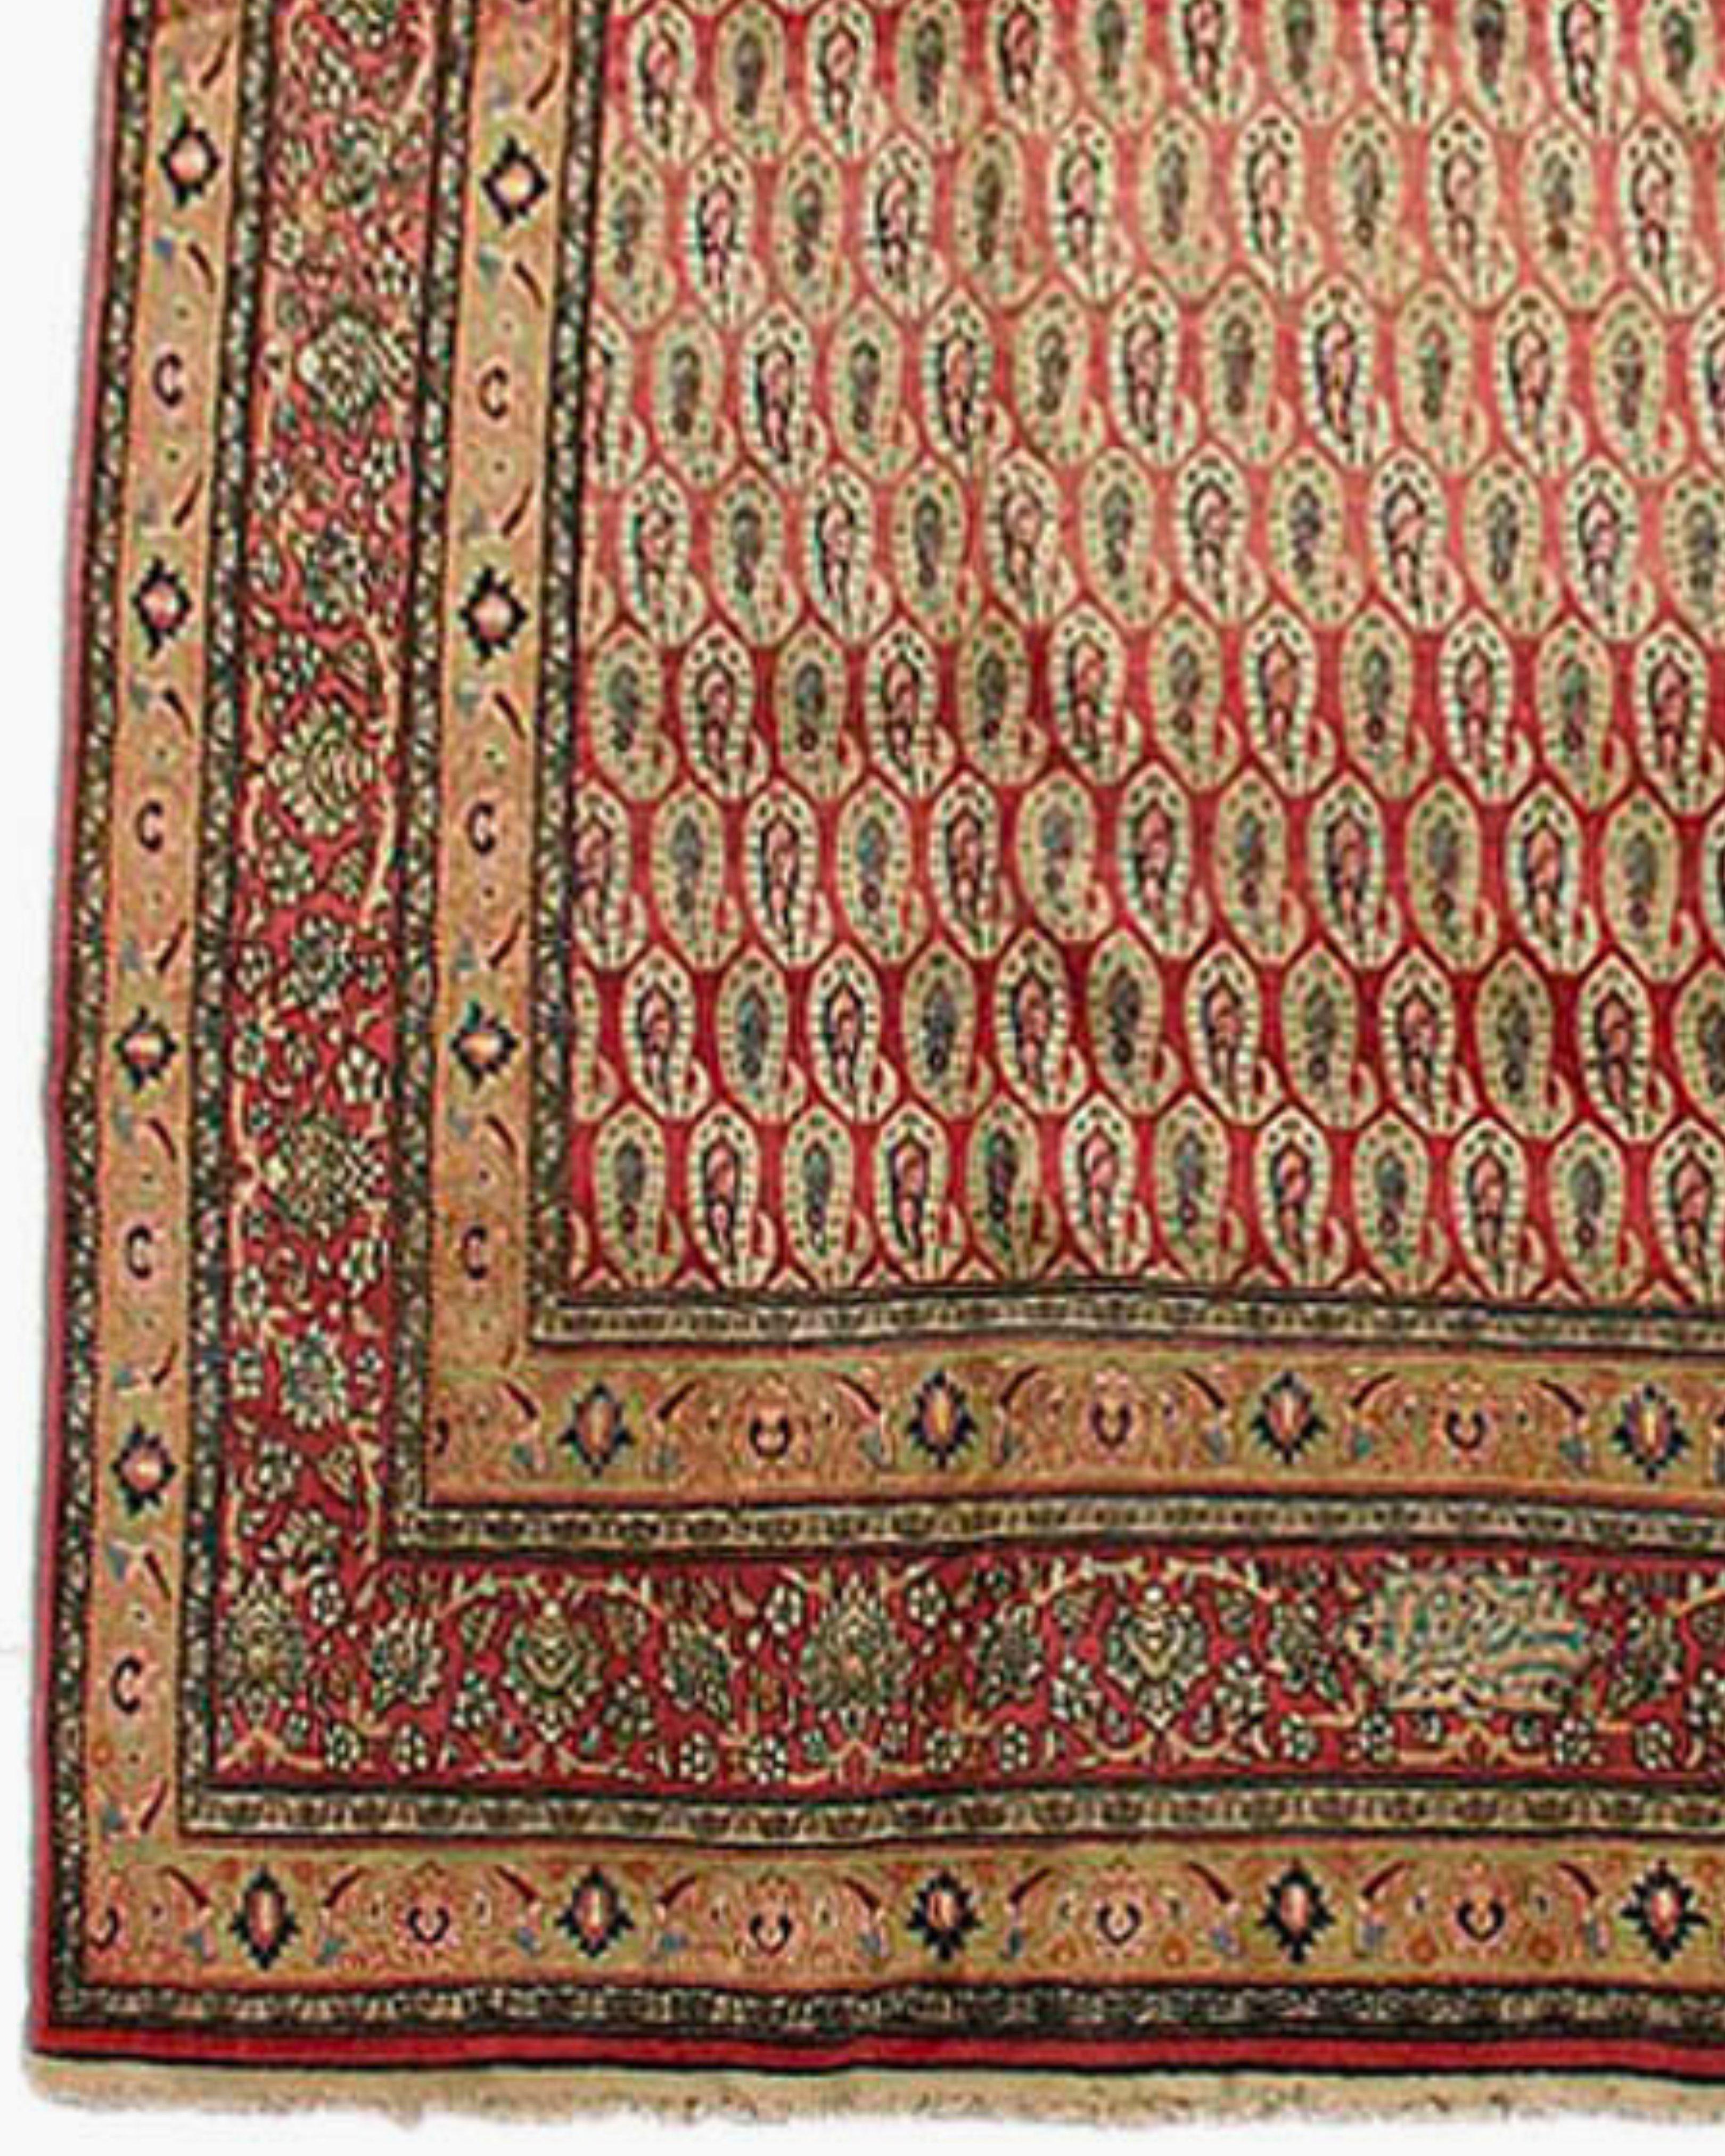 Antique Persian Khorassan Rug, 19th Century In Excellent Condition For Sale In San Francisco, CA